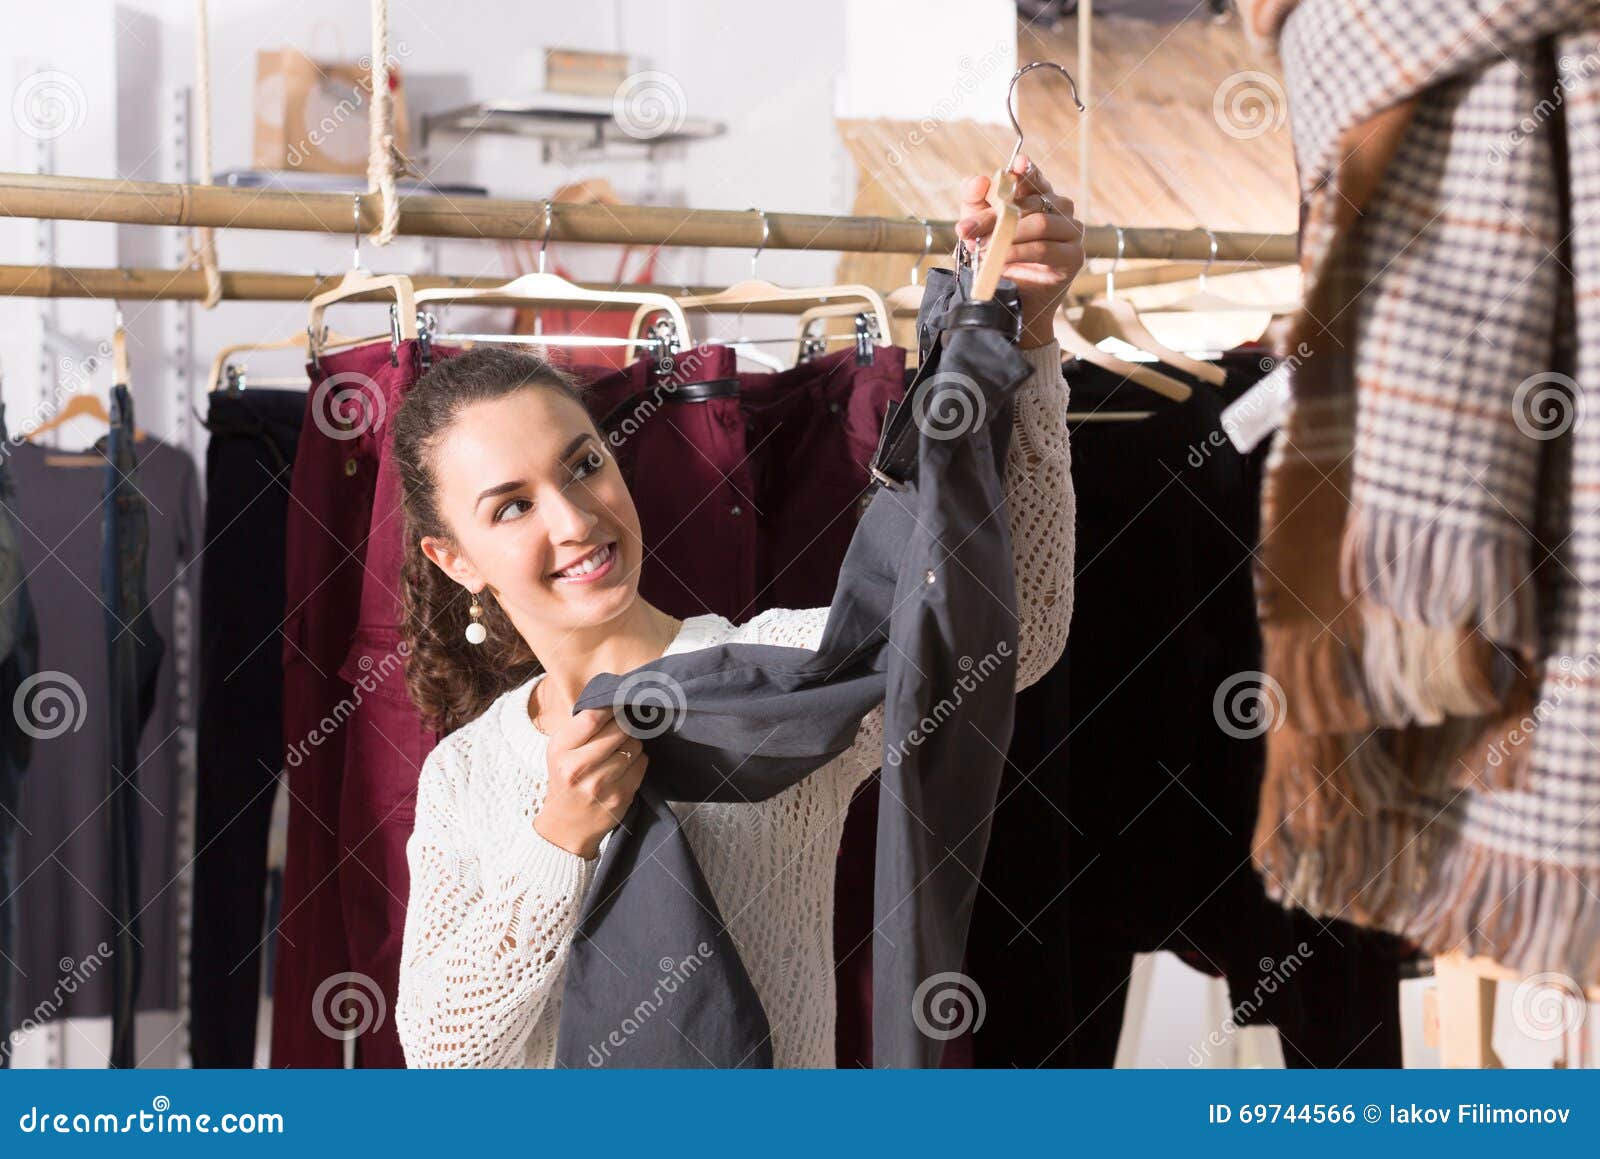 Adult Female Brunette Choosing Trousers in Shop Stock Photo - Image of ...